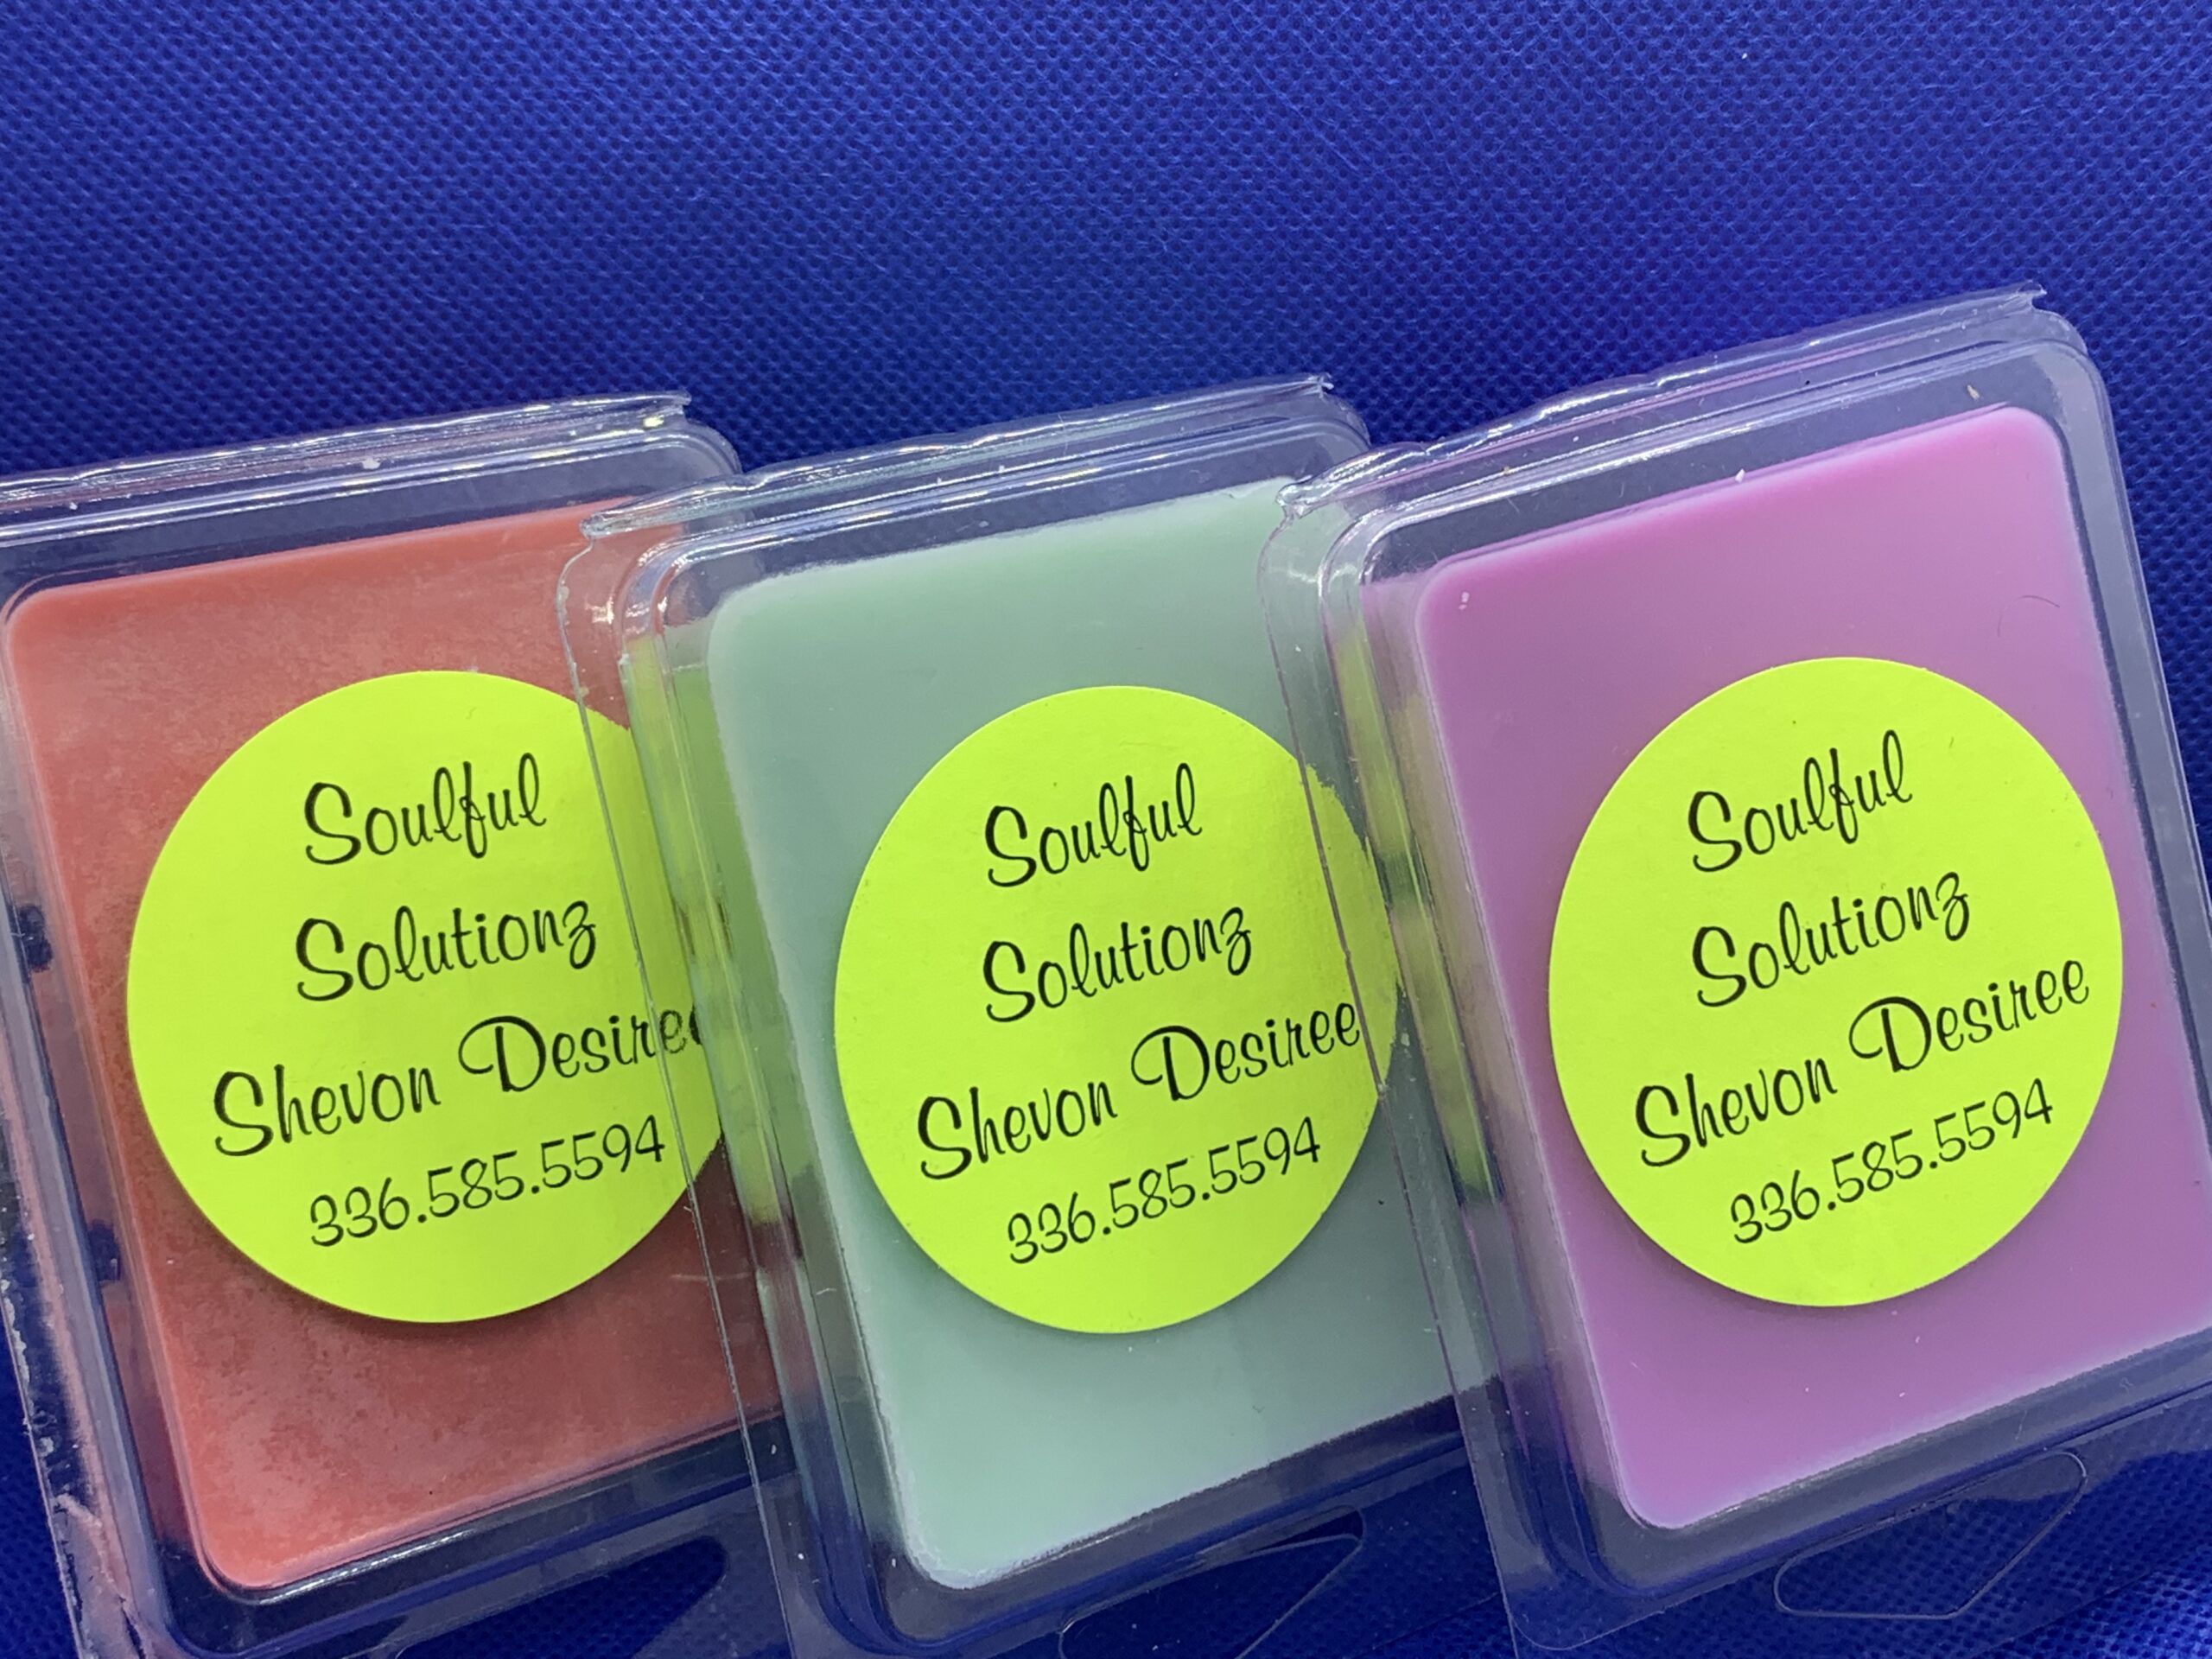 Scented Wax Melts